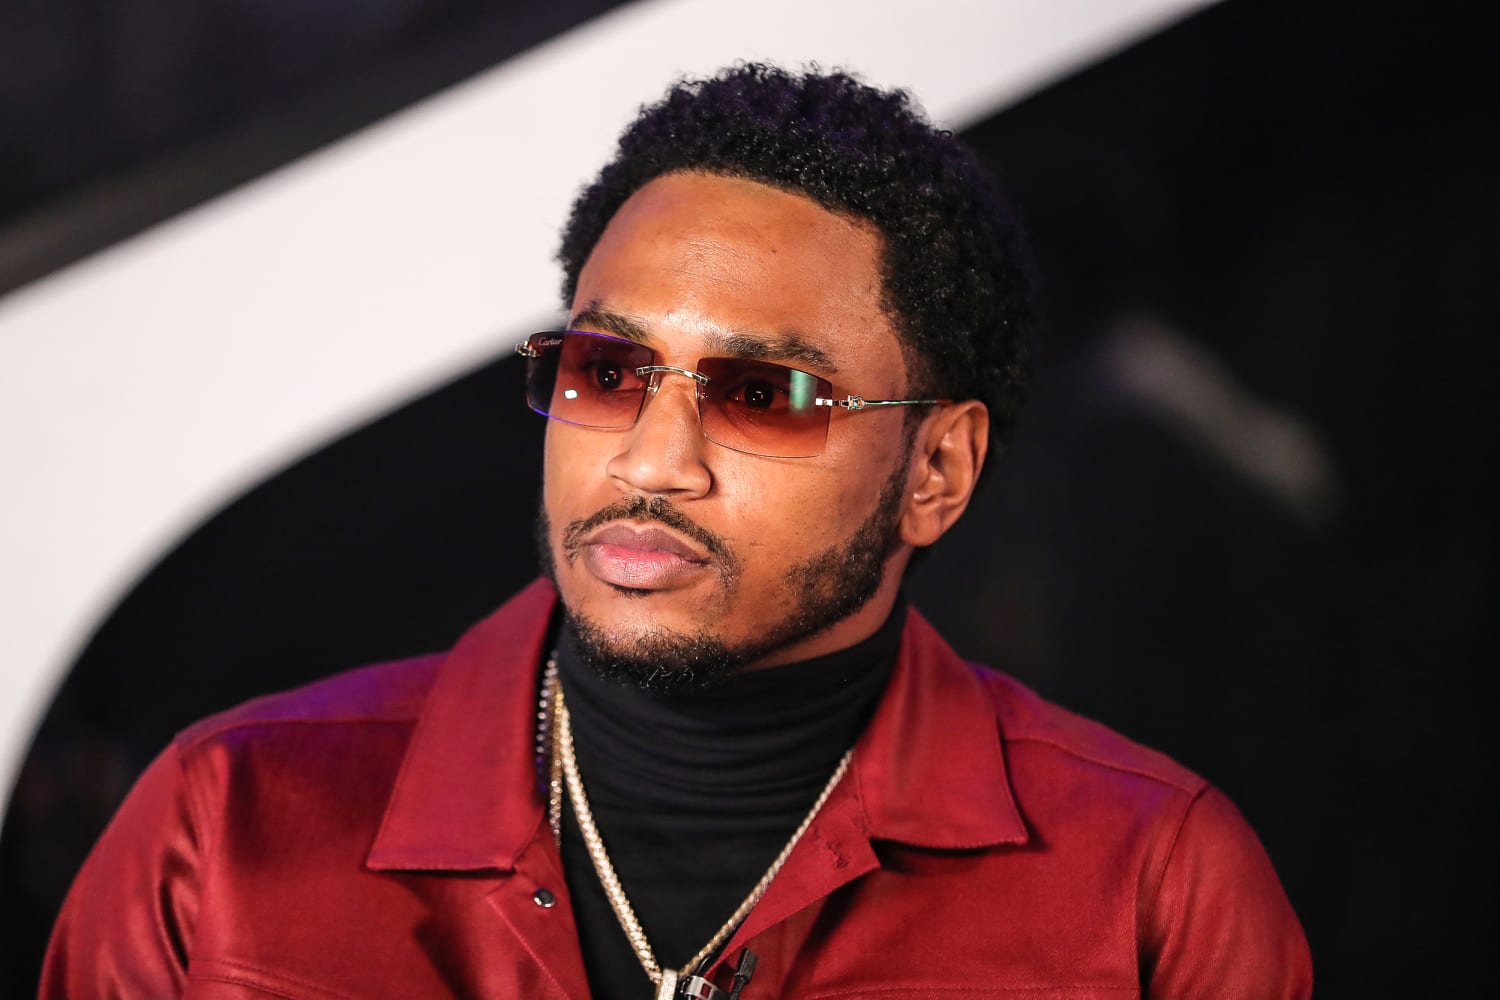 Trey Songz accused of assaulting woman at Miami nightclub, lawsuit alleges